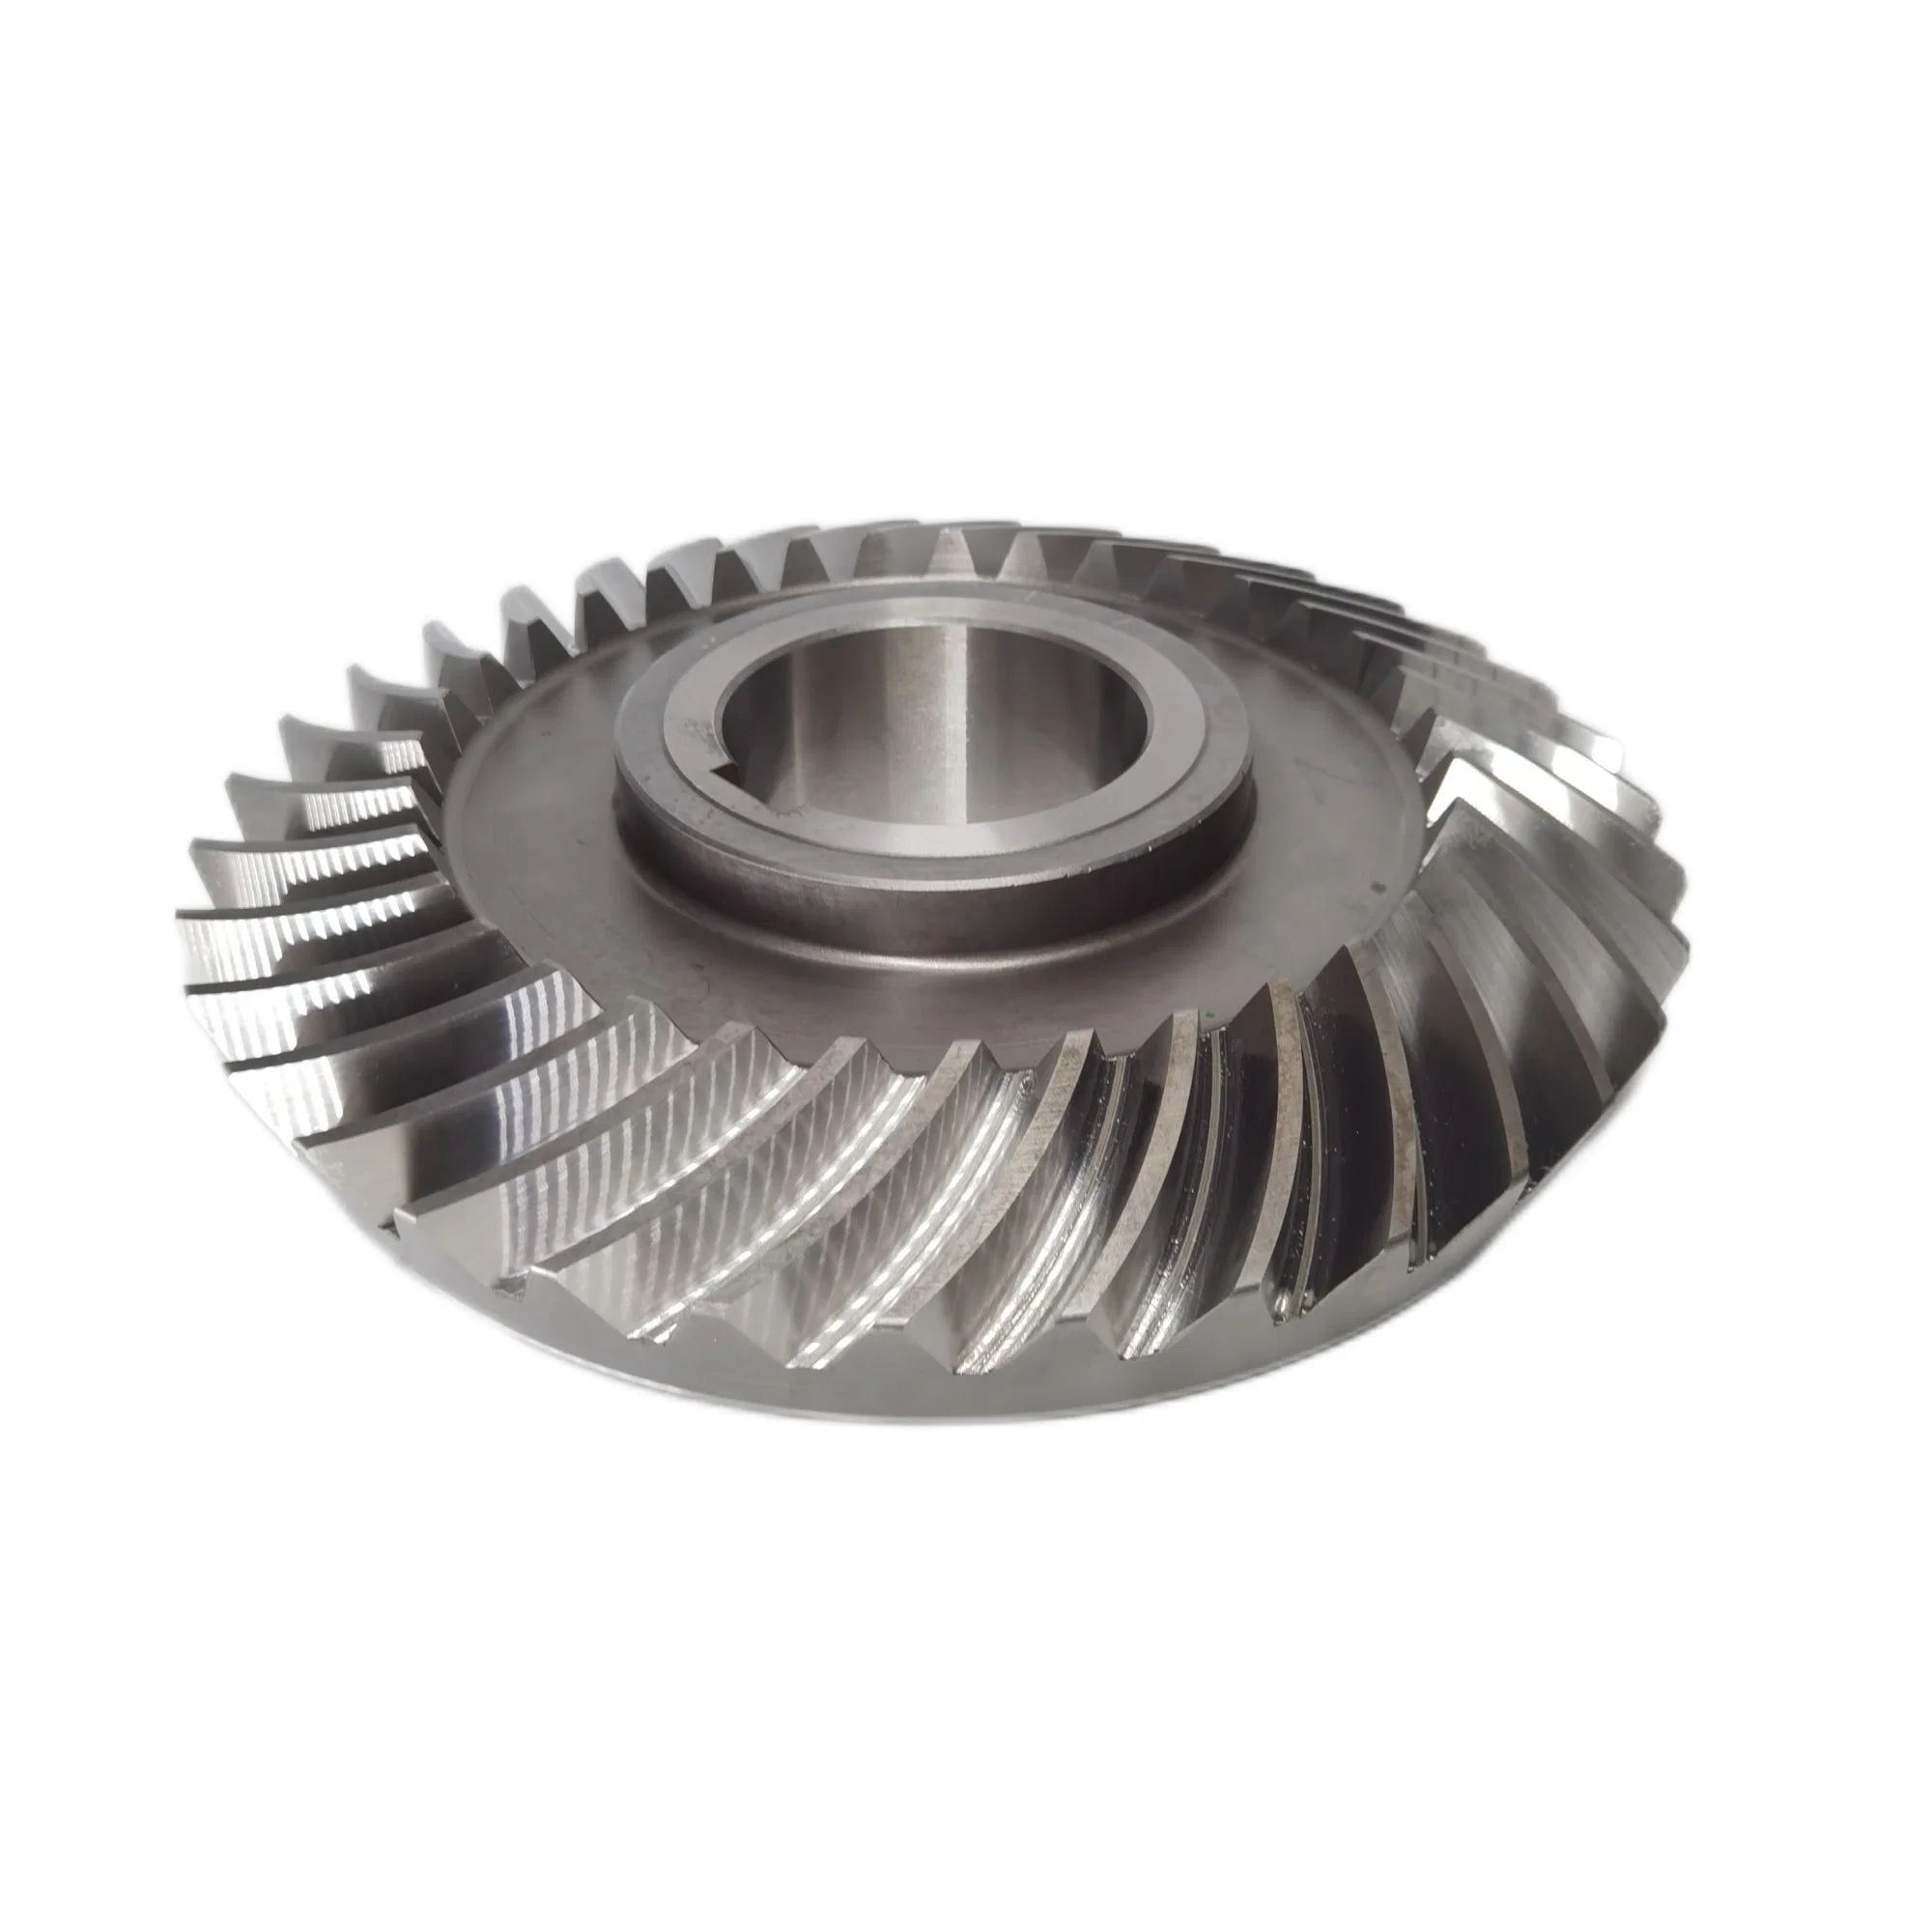 Customized Bevel Gear Module 11 with 35 Teeth of 385mm Diameter and Spiral Right 35 Angle